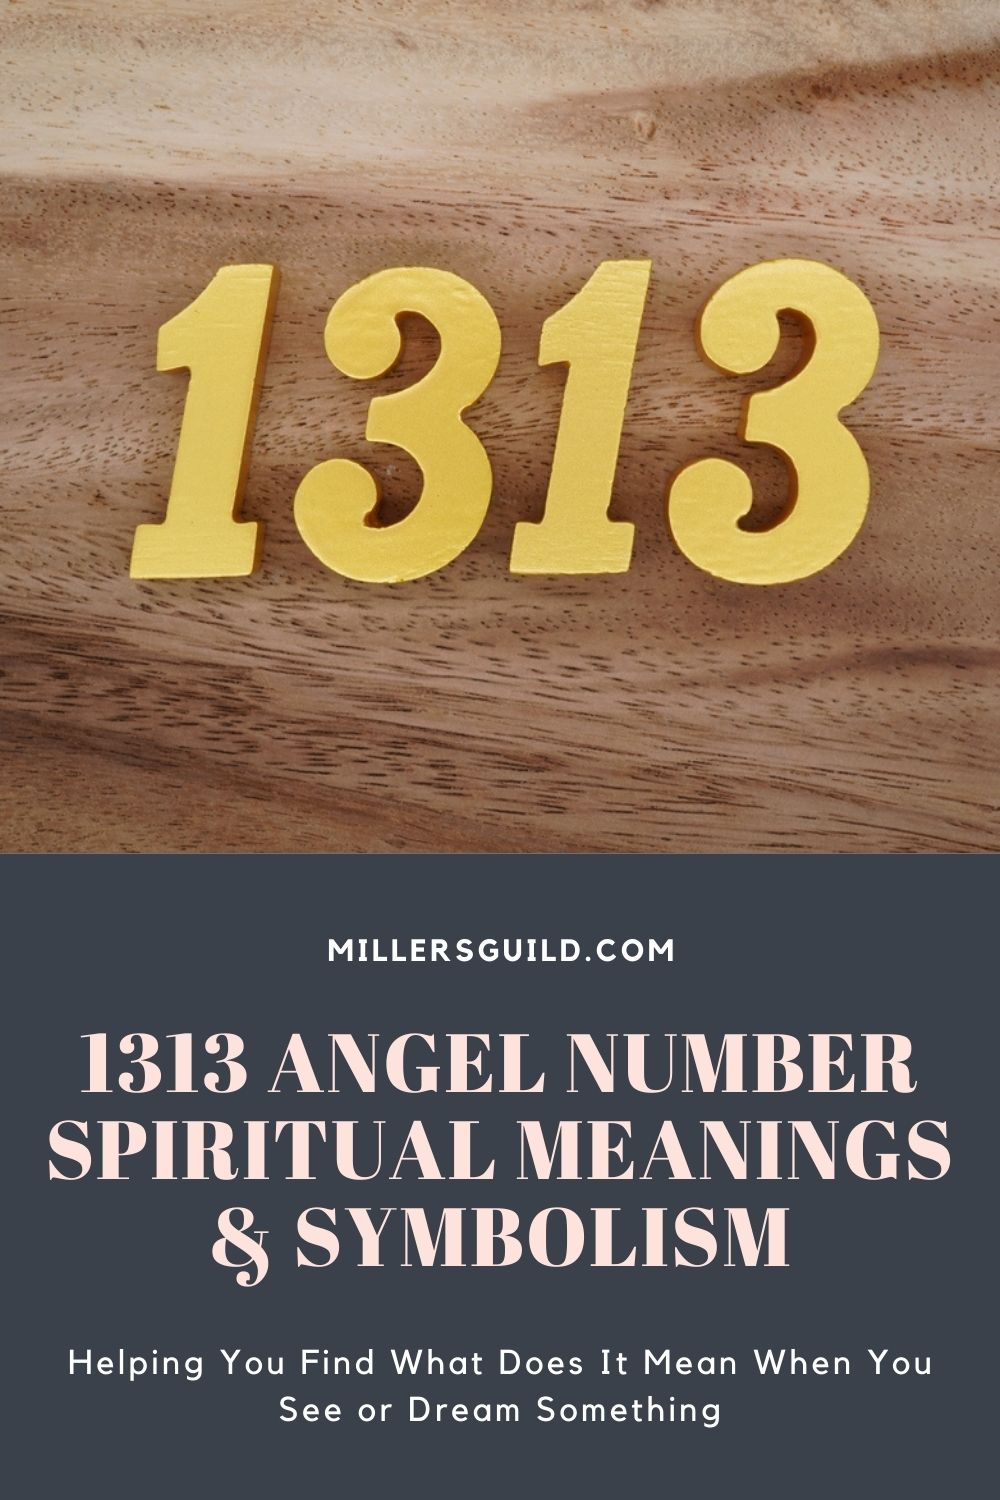 Why Do I Keep Seeing 1313 Angel Number Spiritual Meanings And Symbolism